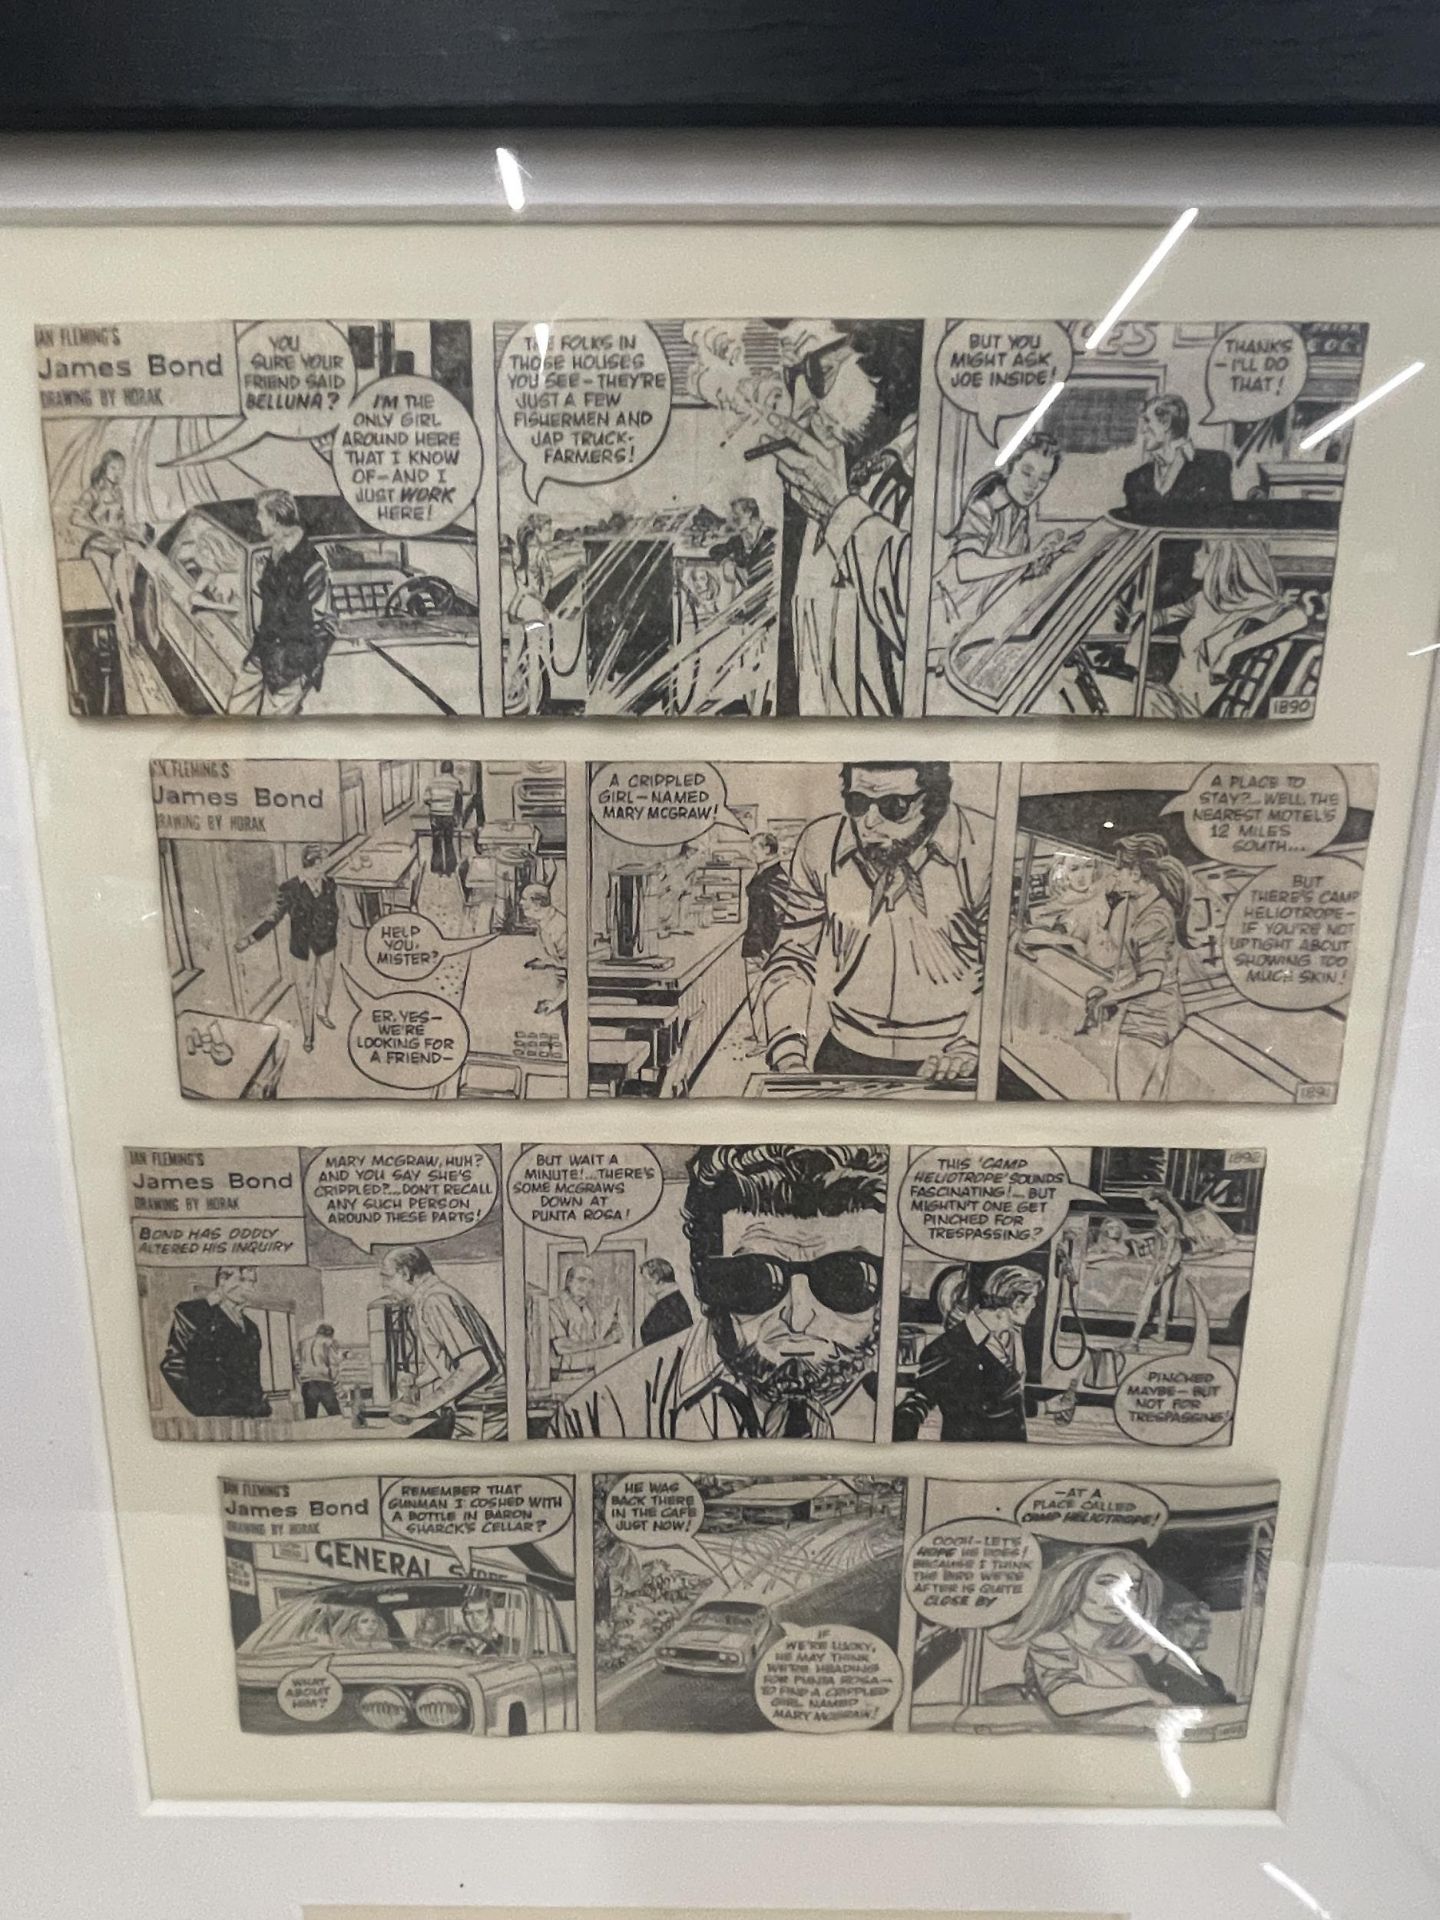 A FRAMED JAMES BOND IAN FLEMING COMIC BOOK STRIP WITH LOWER PENCIL SIGNED DRAWING OF A LADY, - Image 2 of 3